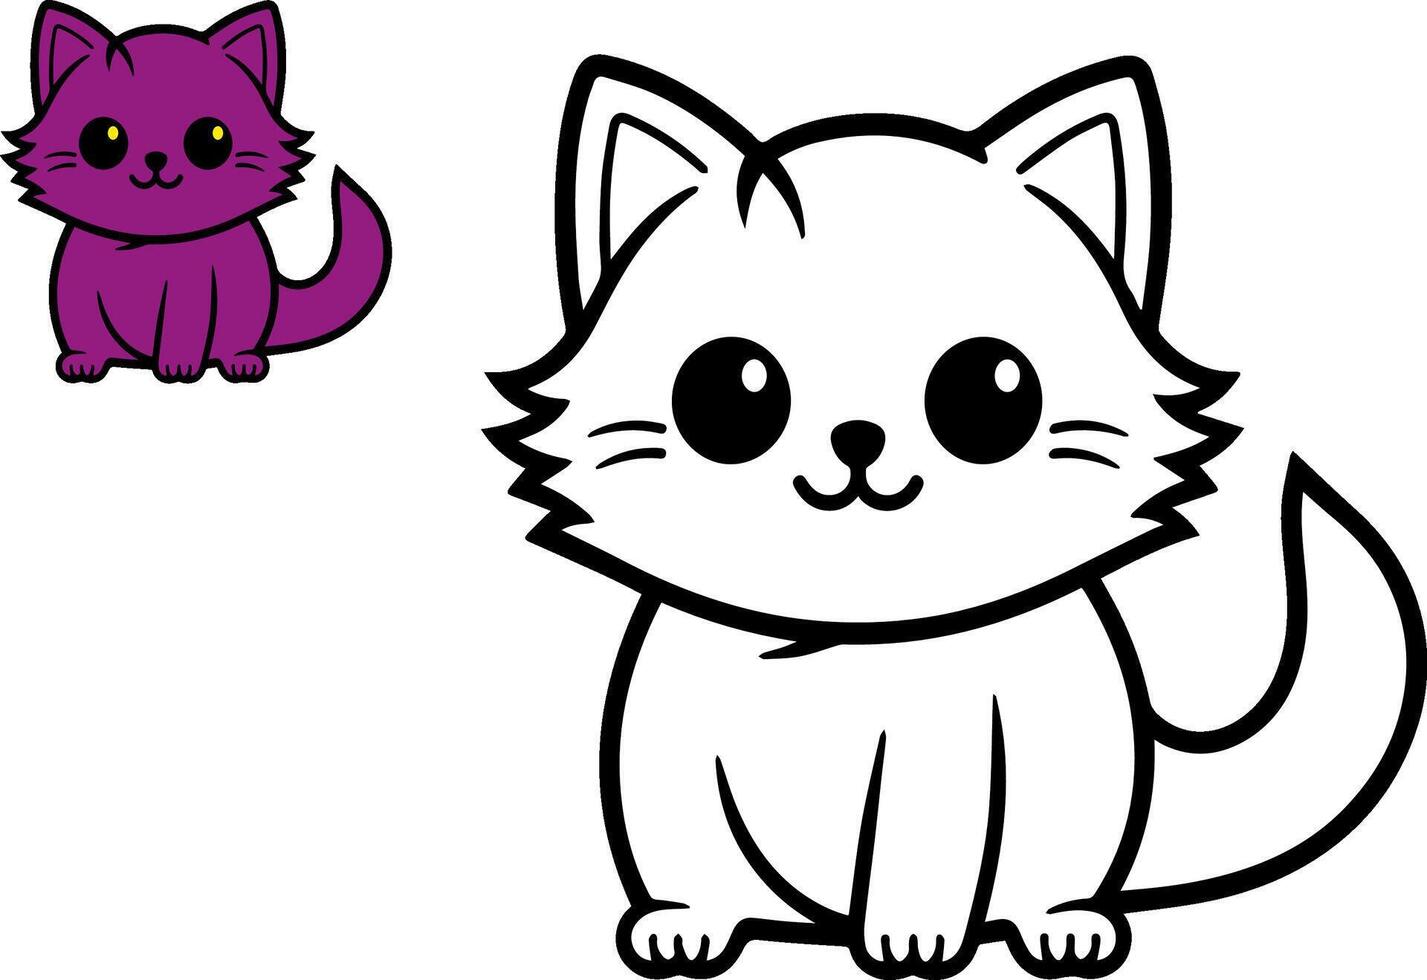 Colorful and black and white pattern for coloring. Illustration of cute kitten. Worksheet for children and adults. Vector image.